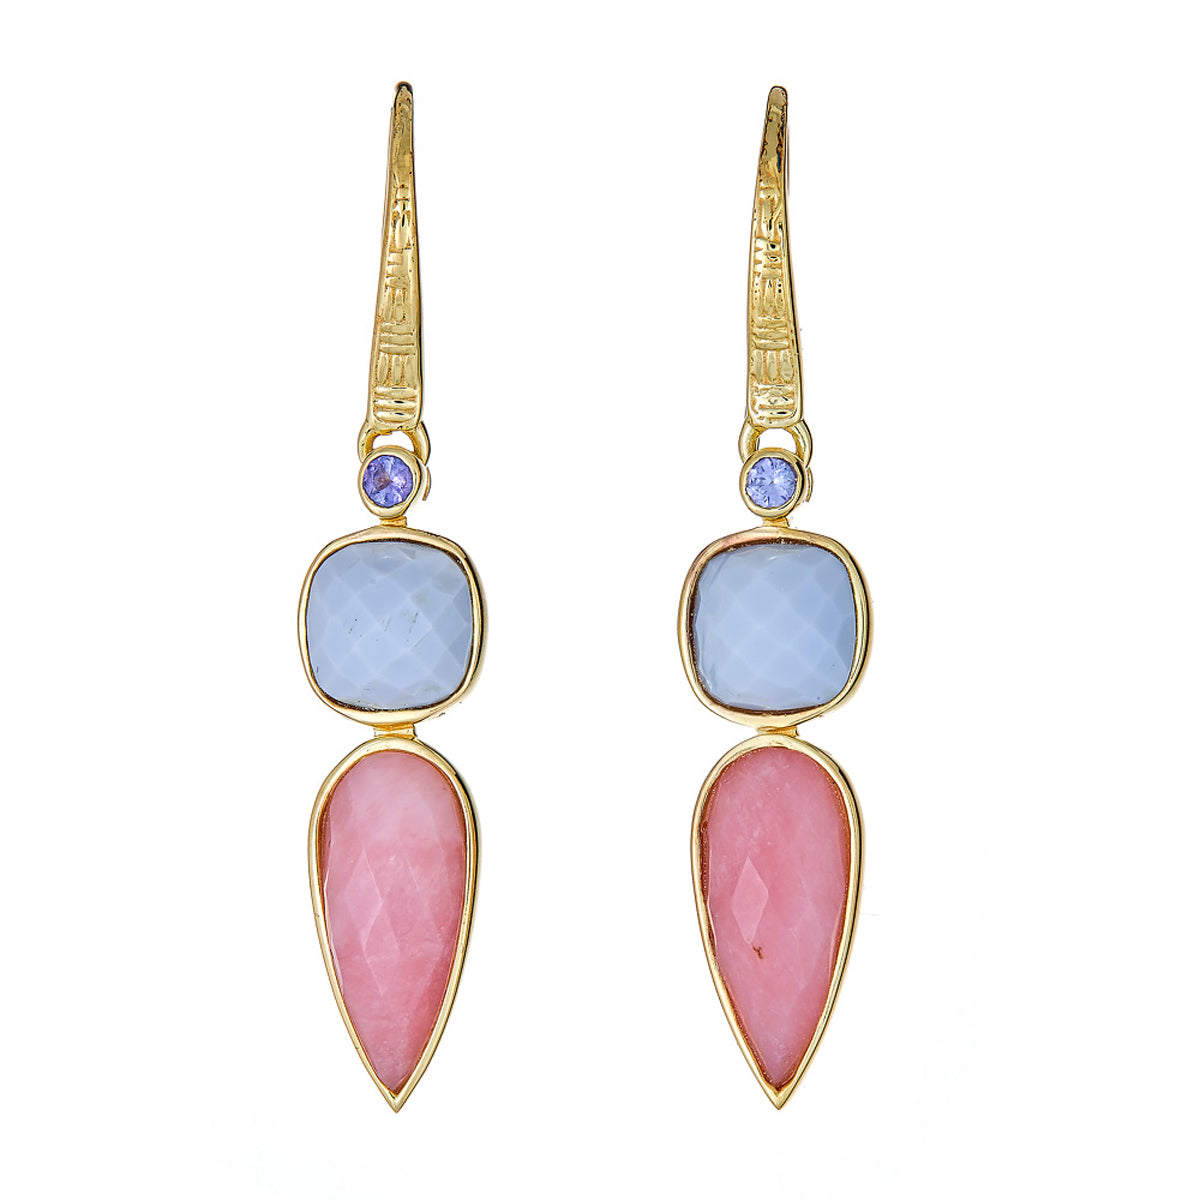 Blue and Pink Opal Unique Fashion Earrings Sterling Silver Gold Plated , unique fashion earrings